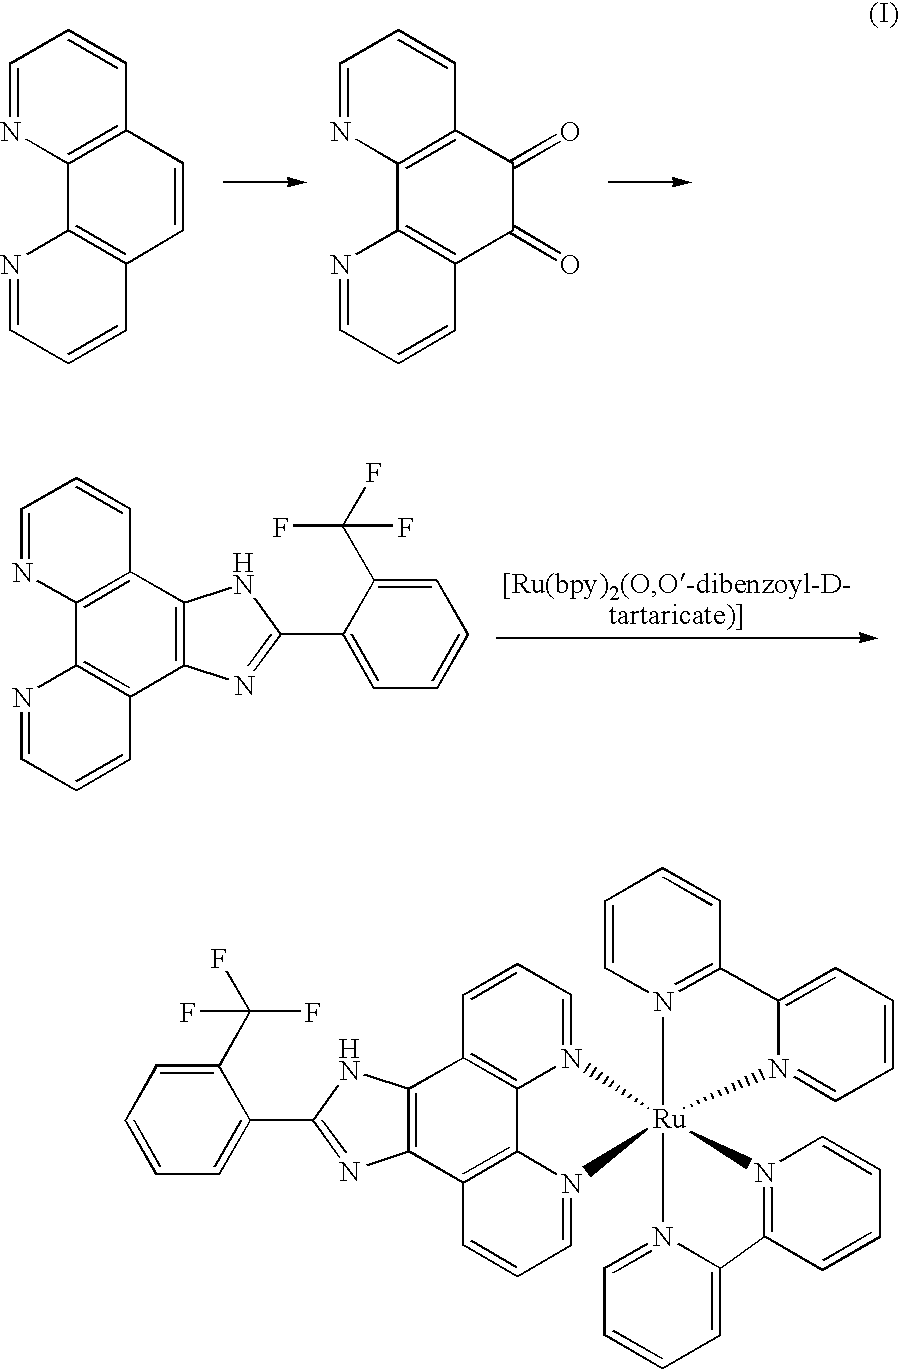 Chair ruthenium complexes and their use as anticancer agents